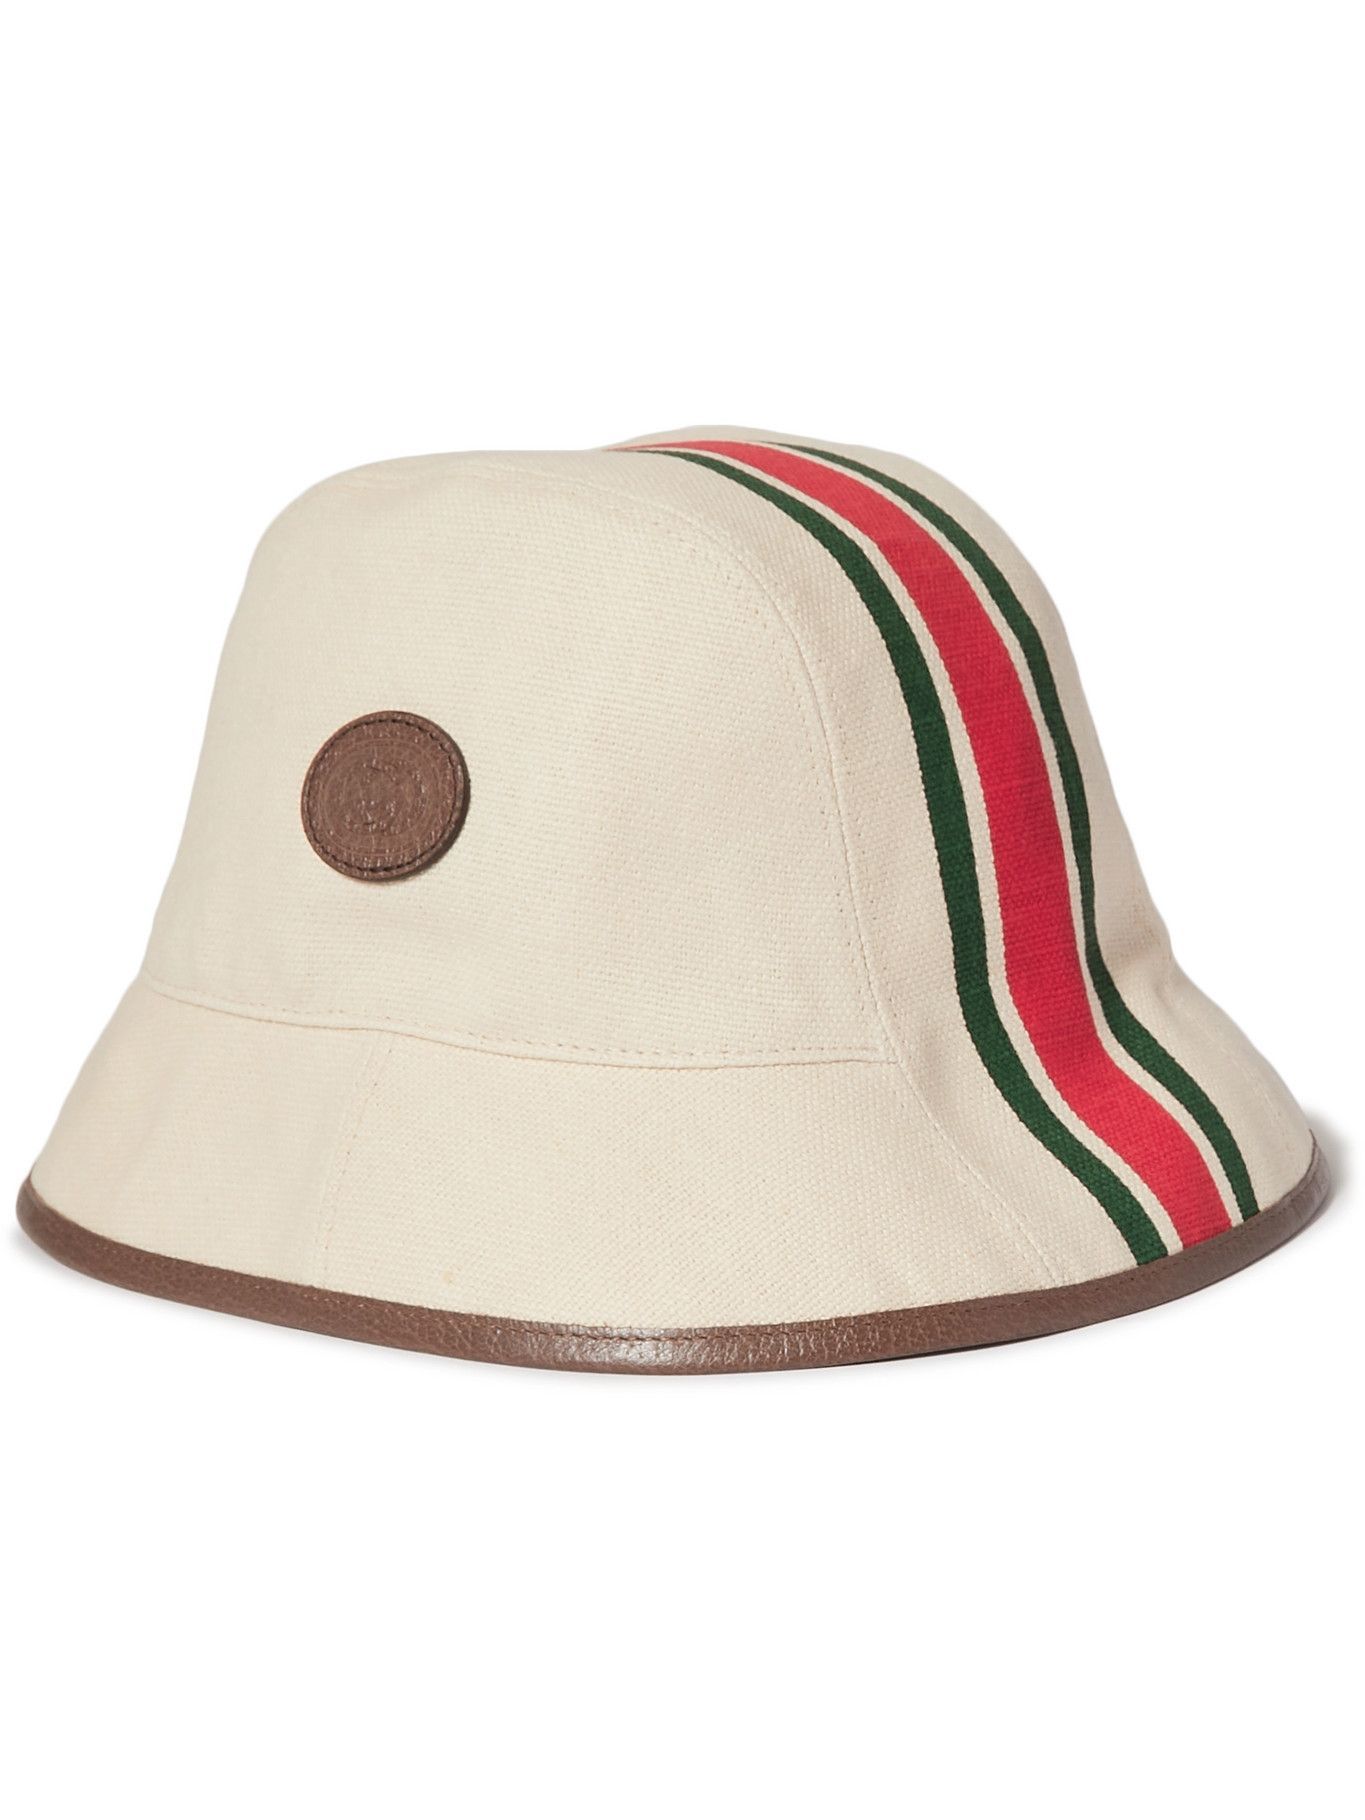 GUCCI - Leather-Trimmed Striped Linen-Canvas Bucket Hat - Neutrals Gucci